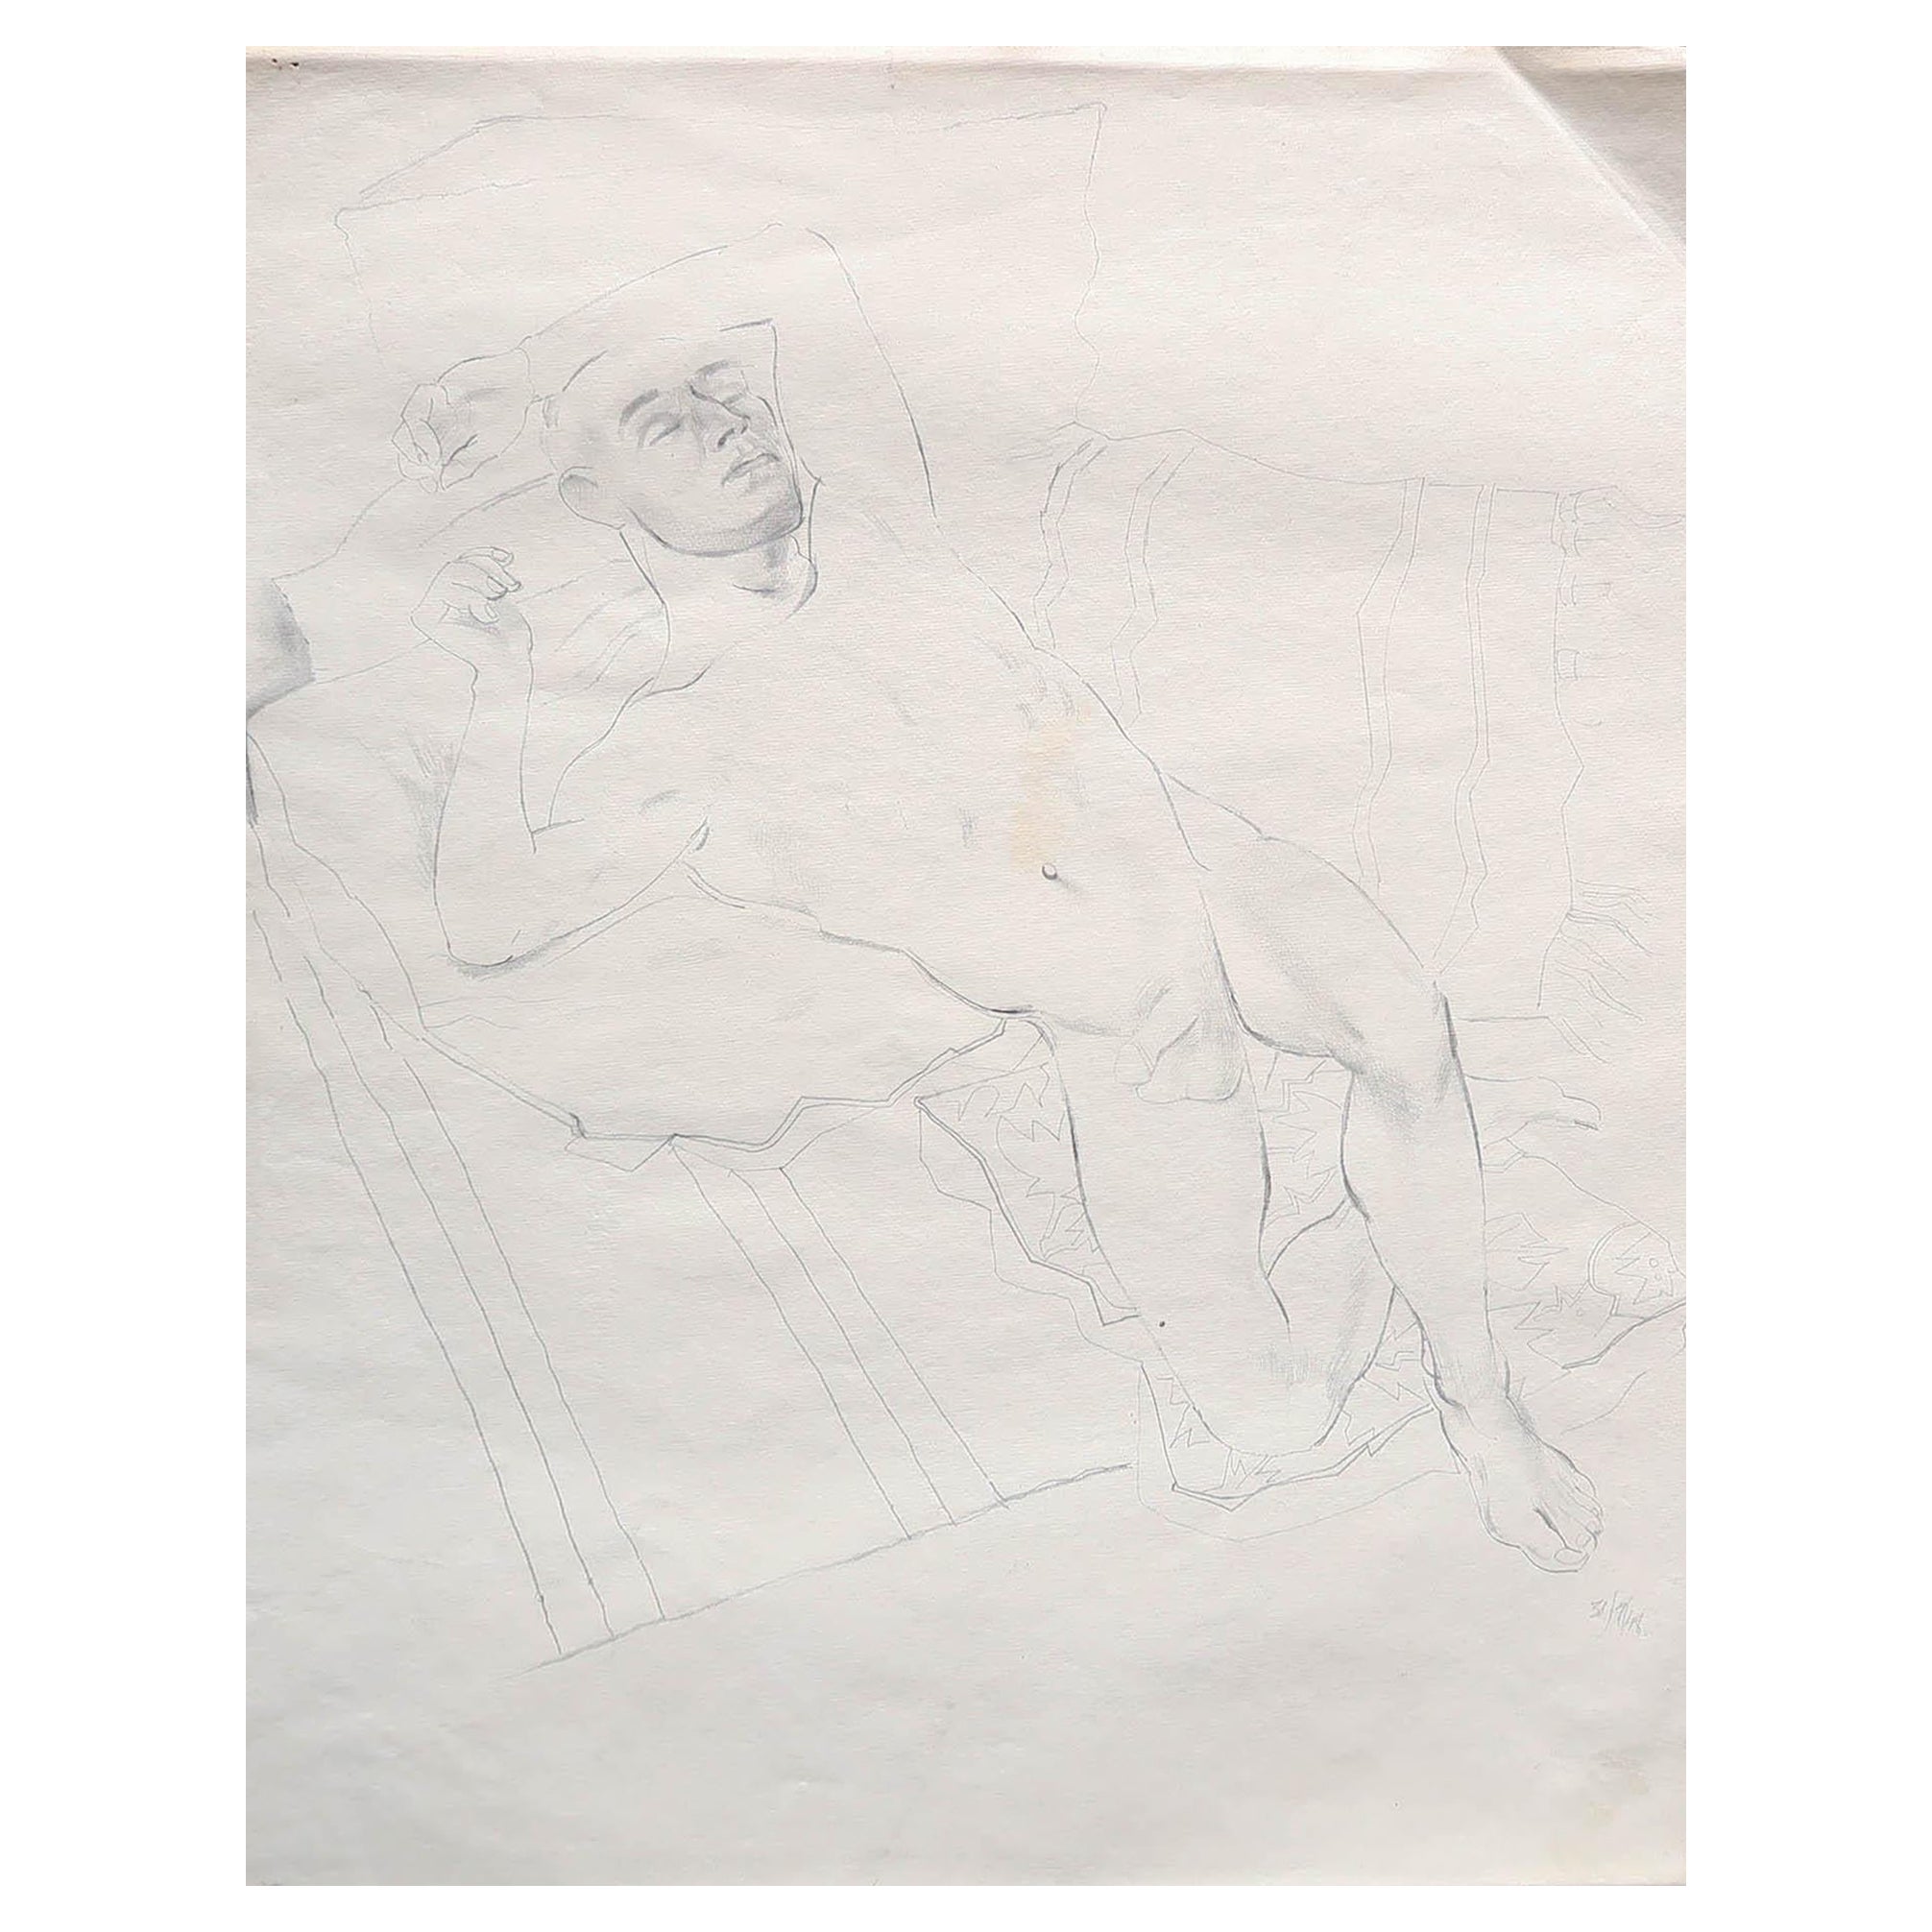 Male Nude. Peter William Ibbetson. Graphite On Paper. Dated 1948